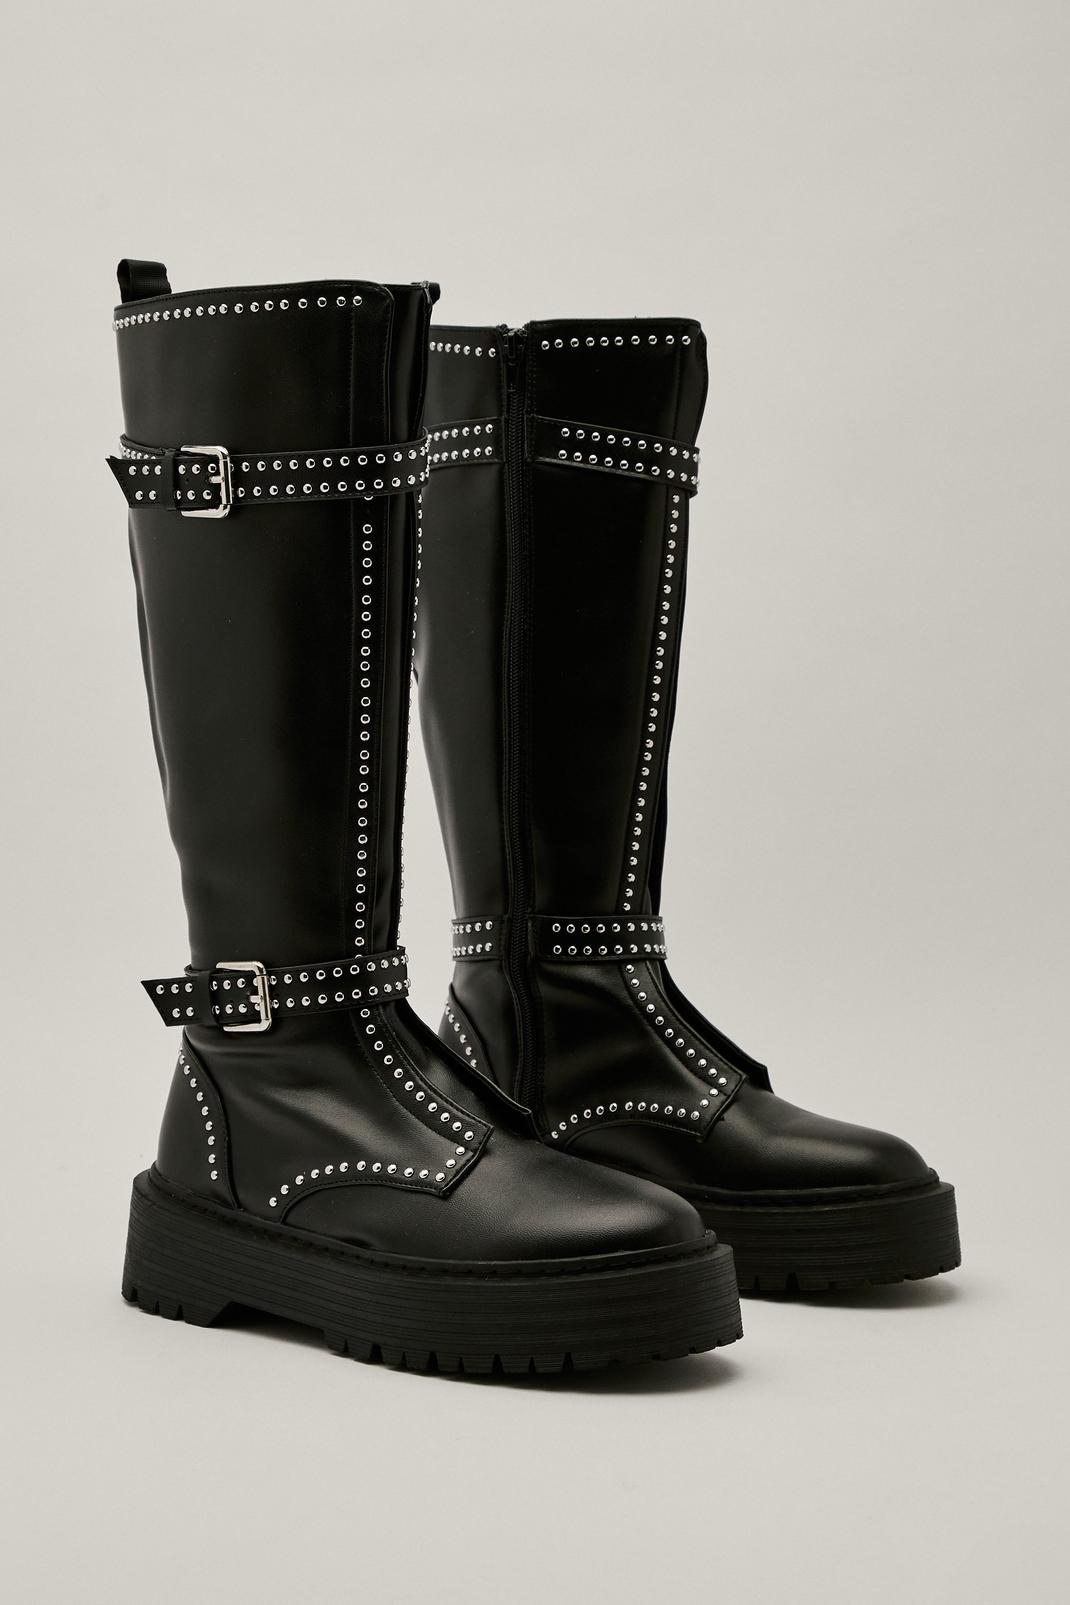 105 Faux Leather Double Buckle Studded Calf High Boots image number 1